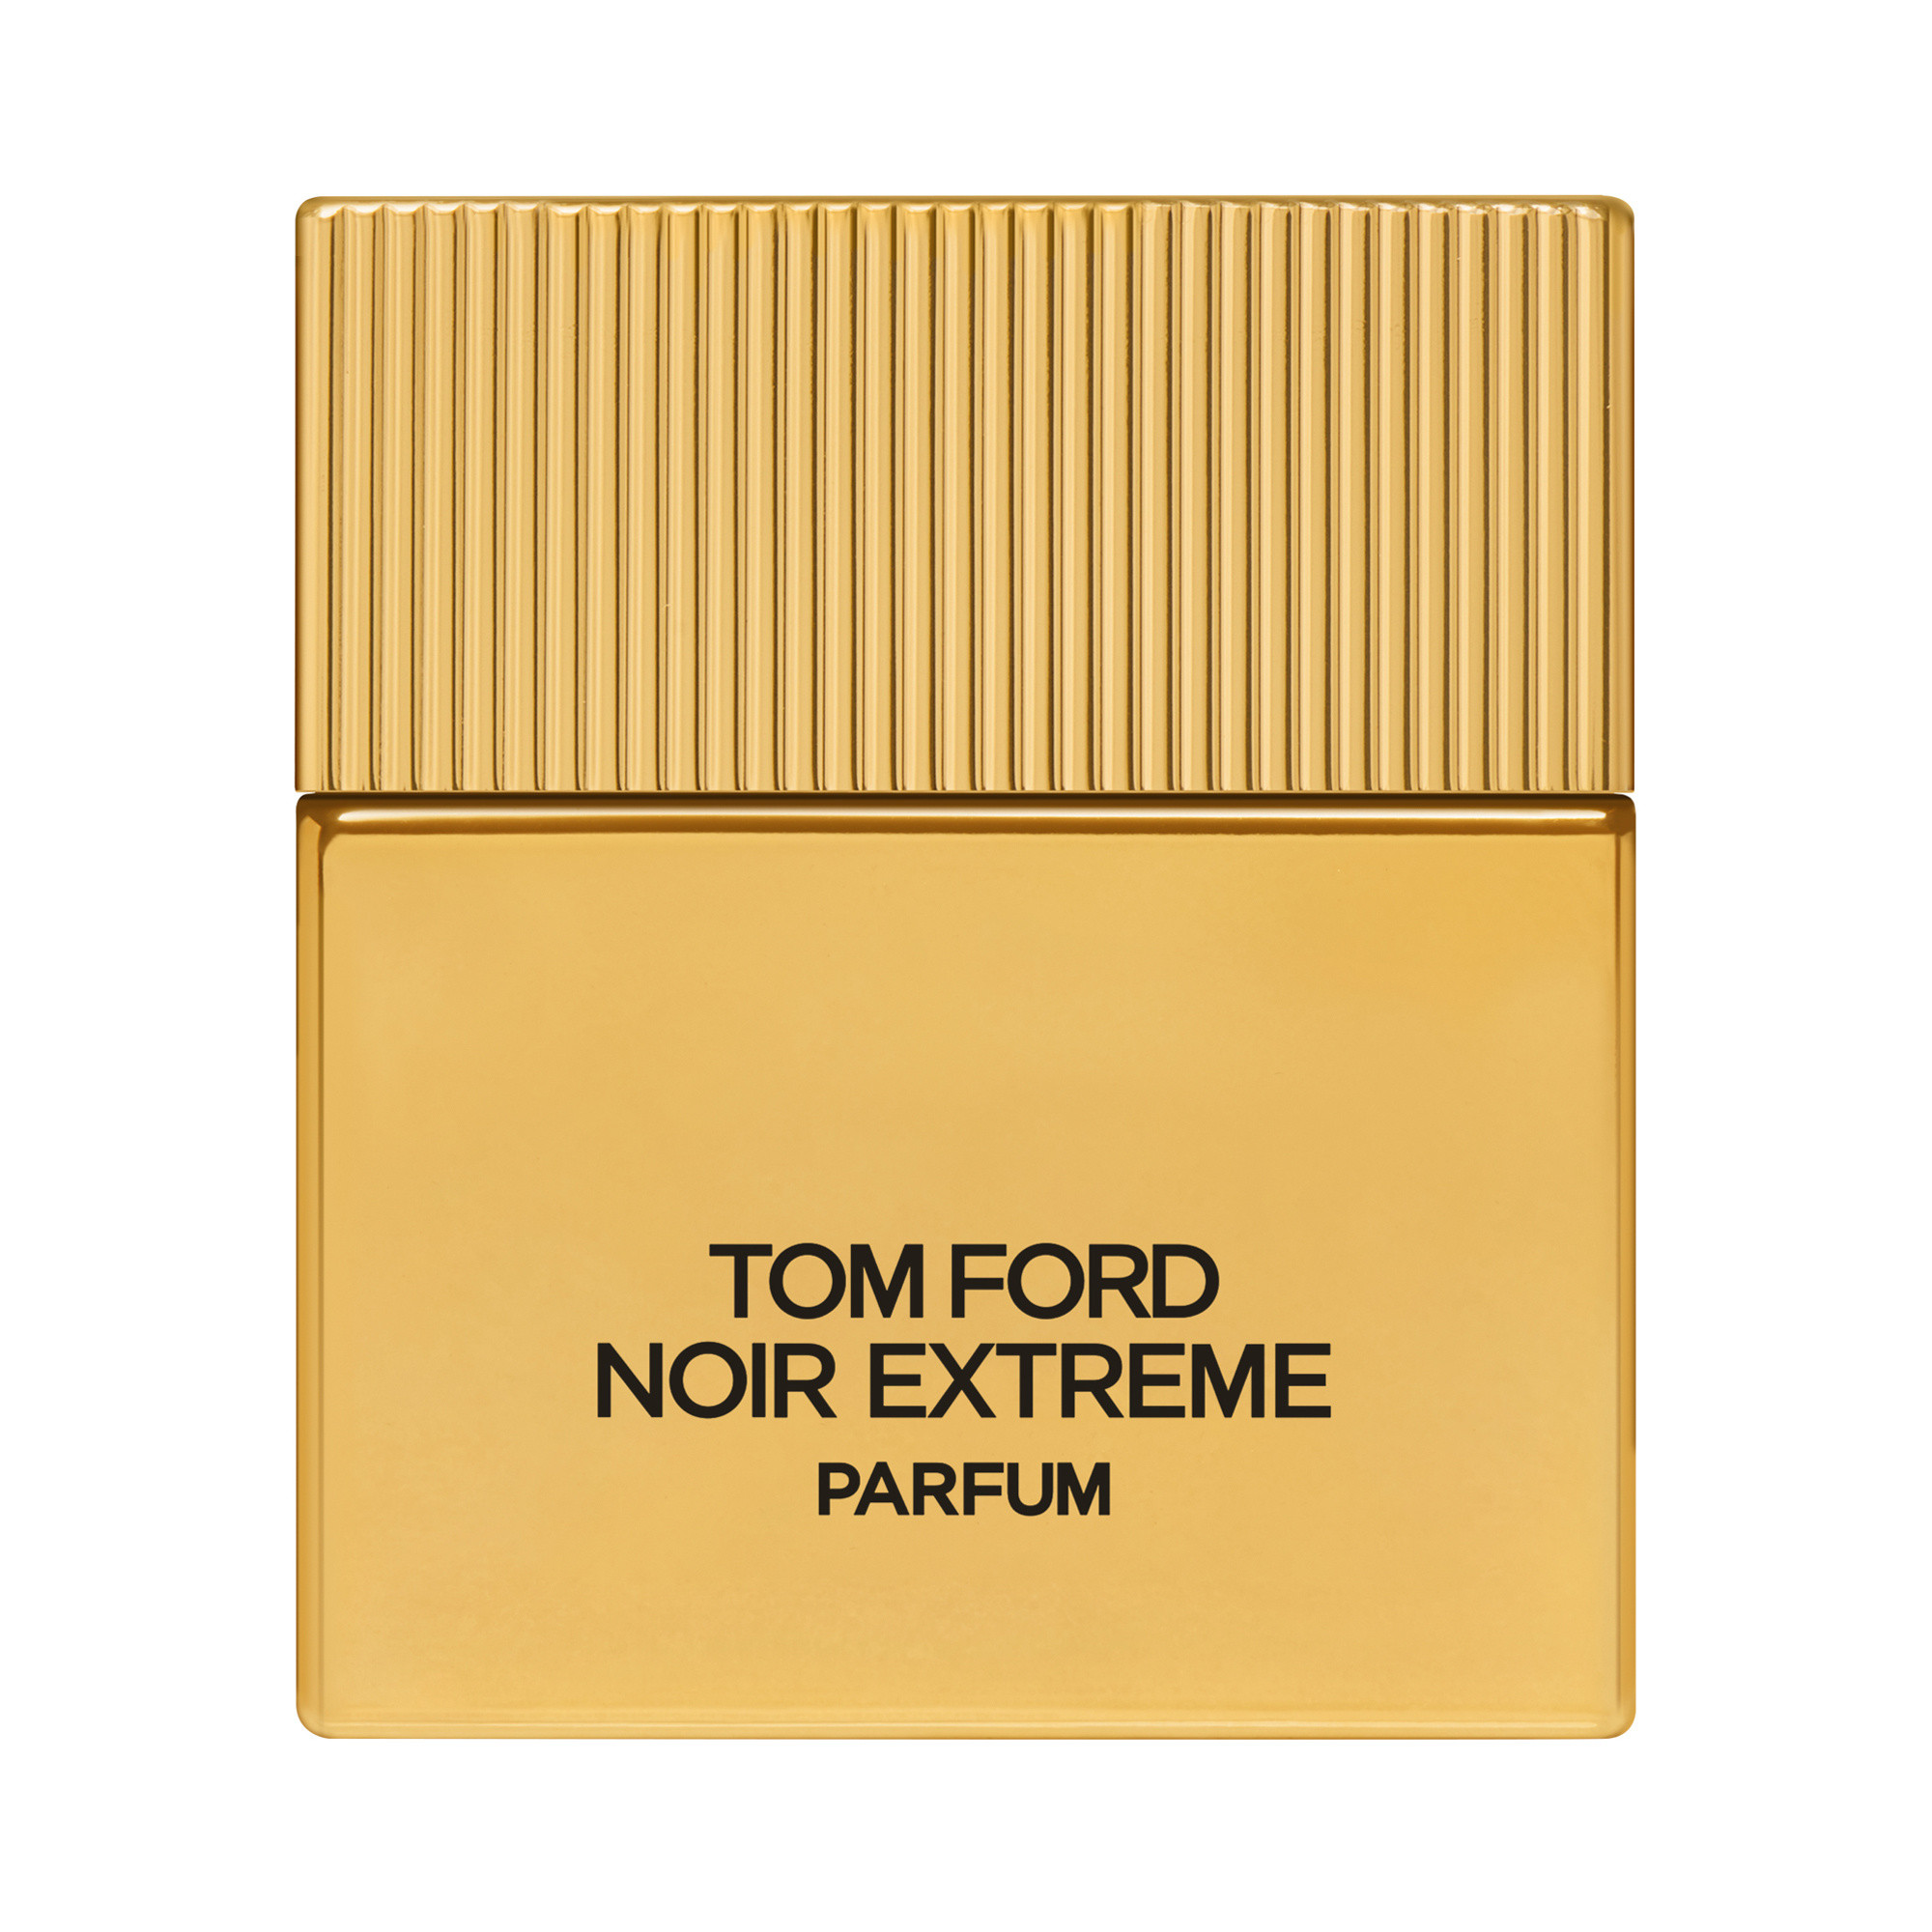 Tom Ford Beauty - Noir Extreme Parfum 50 ml, Giallo oro, large image number 0